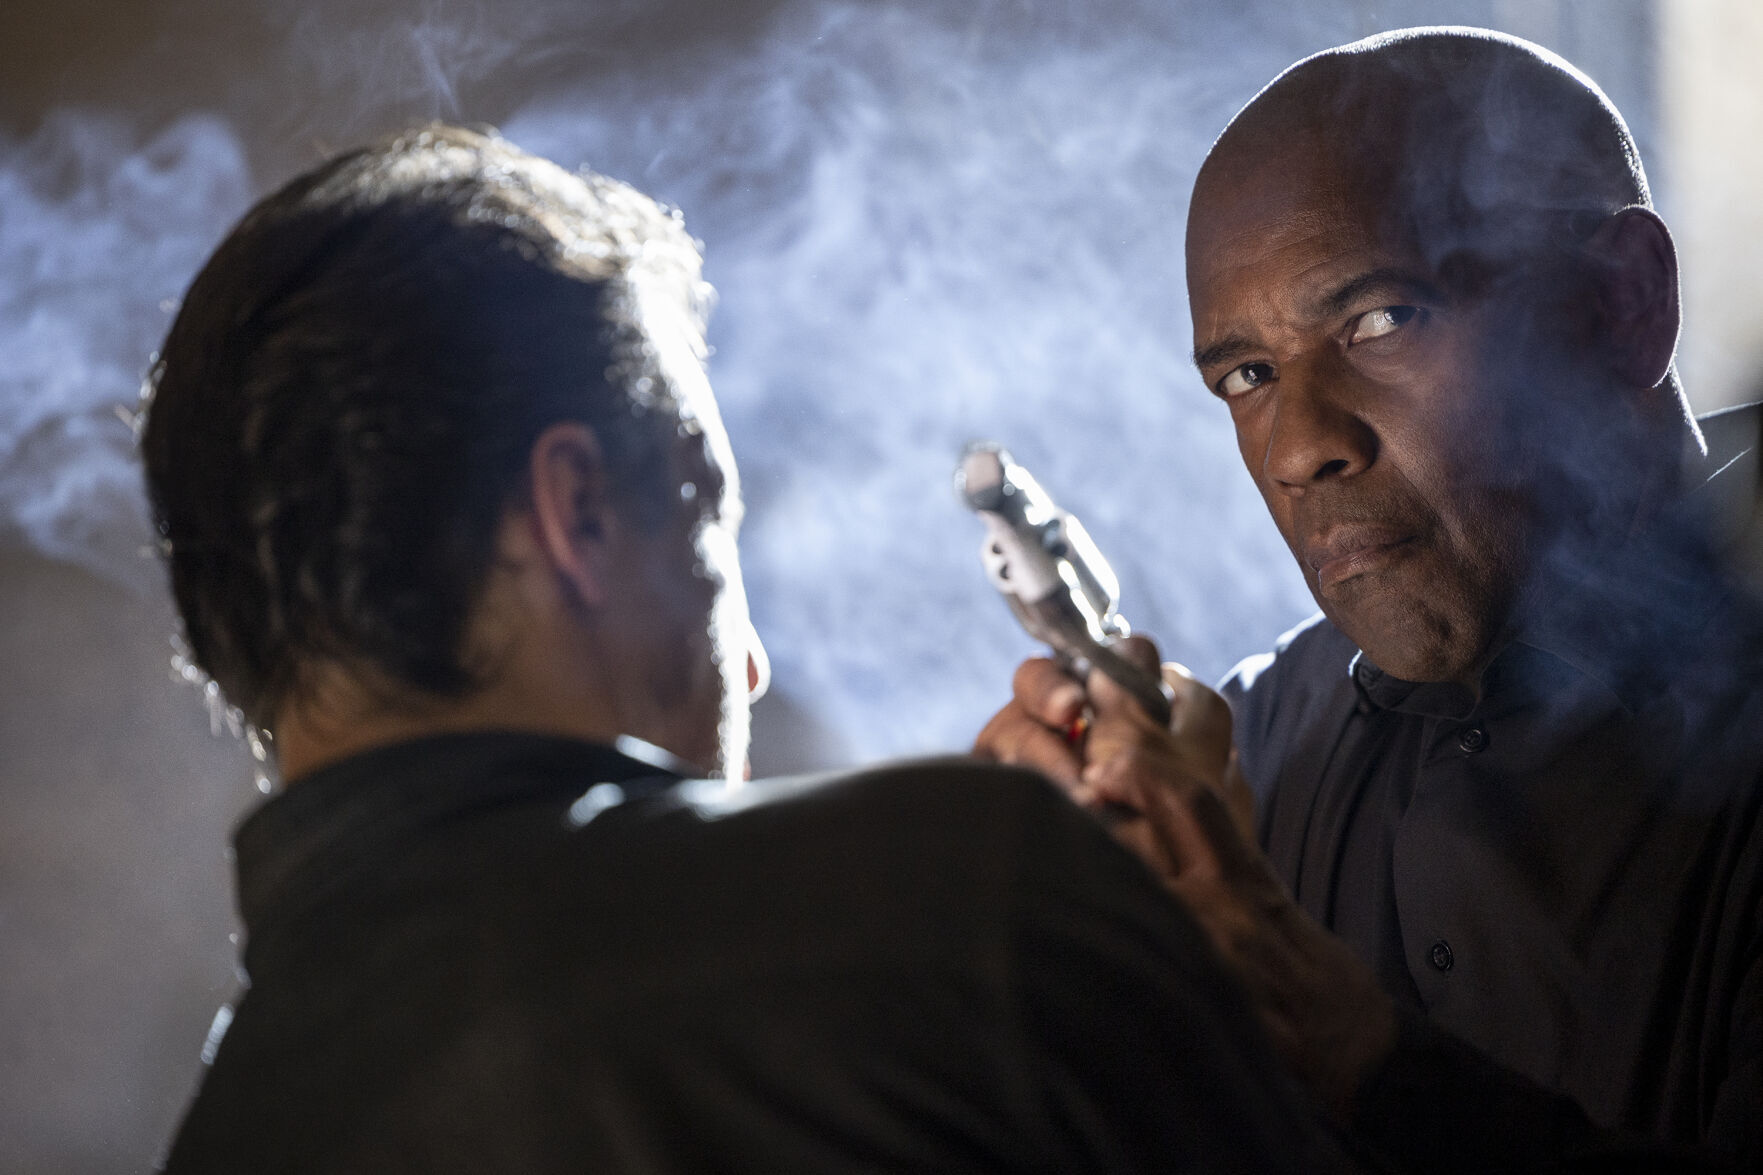 will there be an equalizer 3 with denzel washington